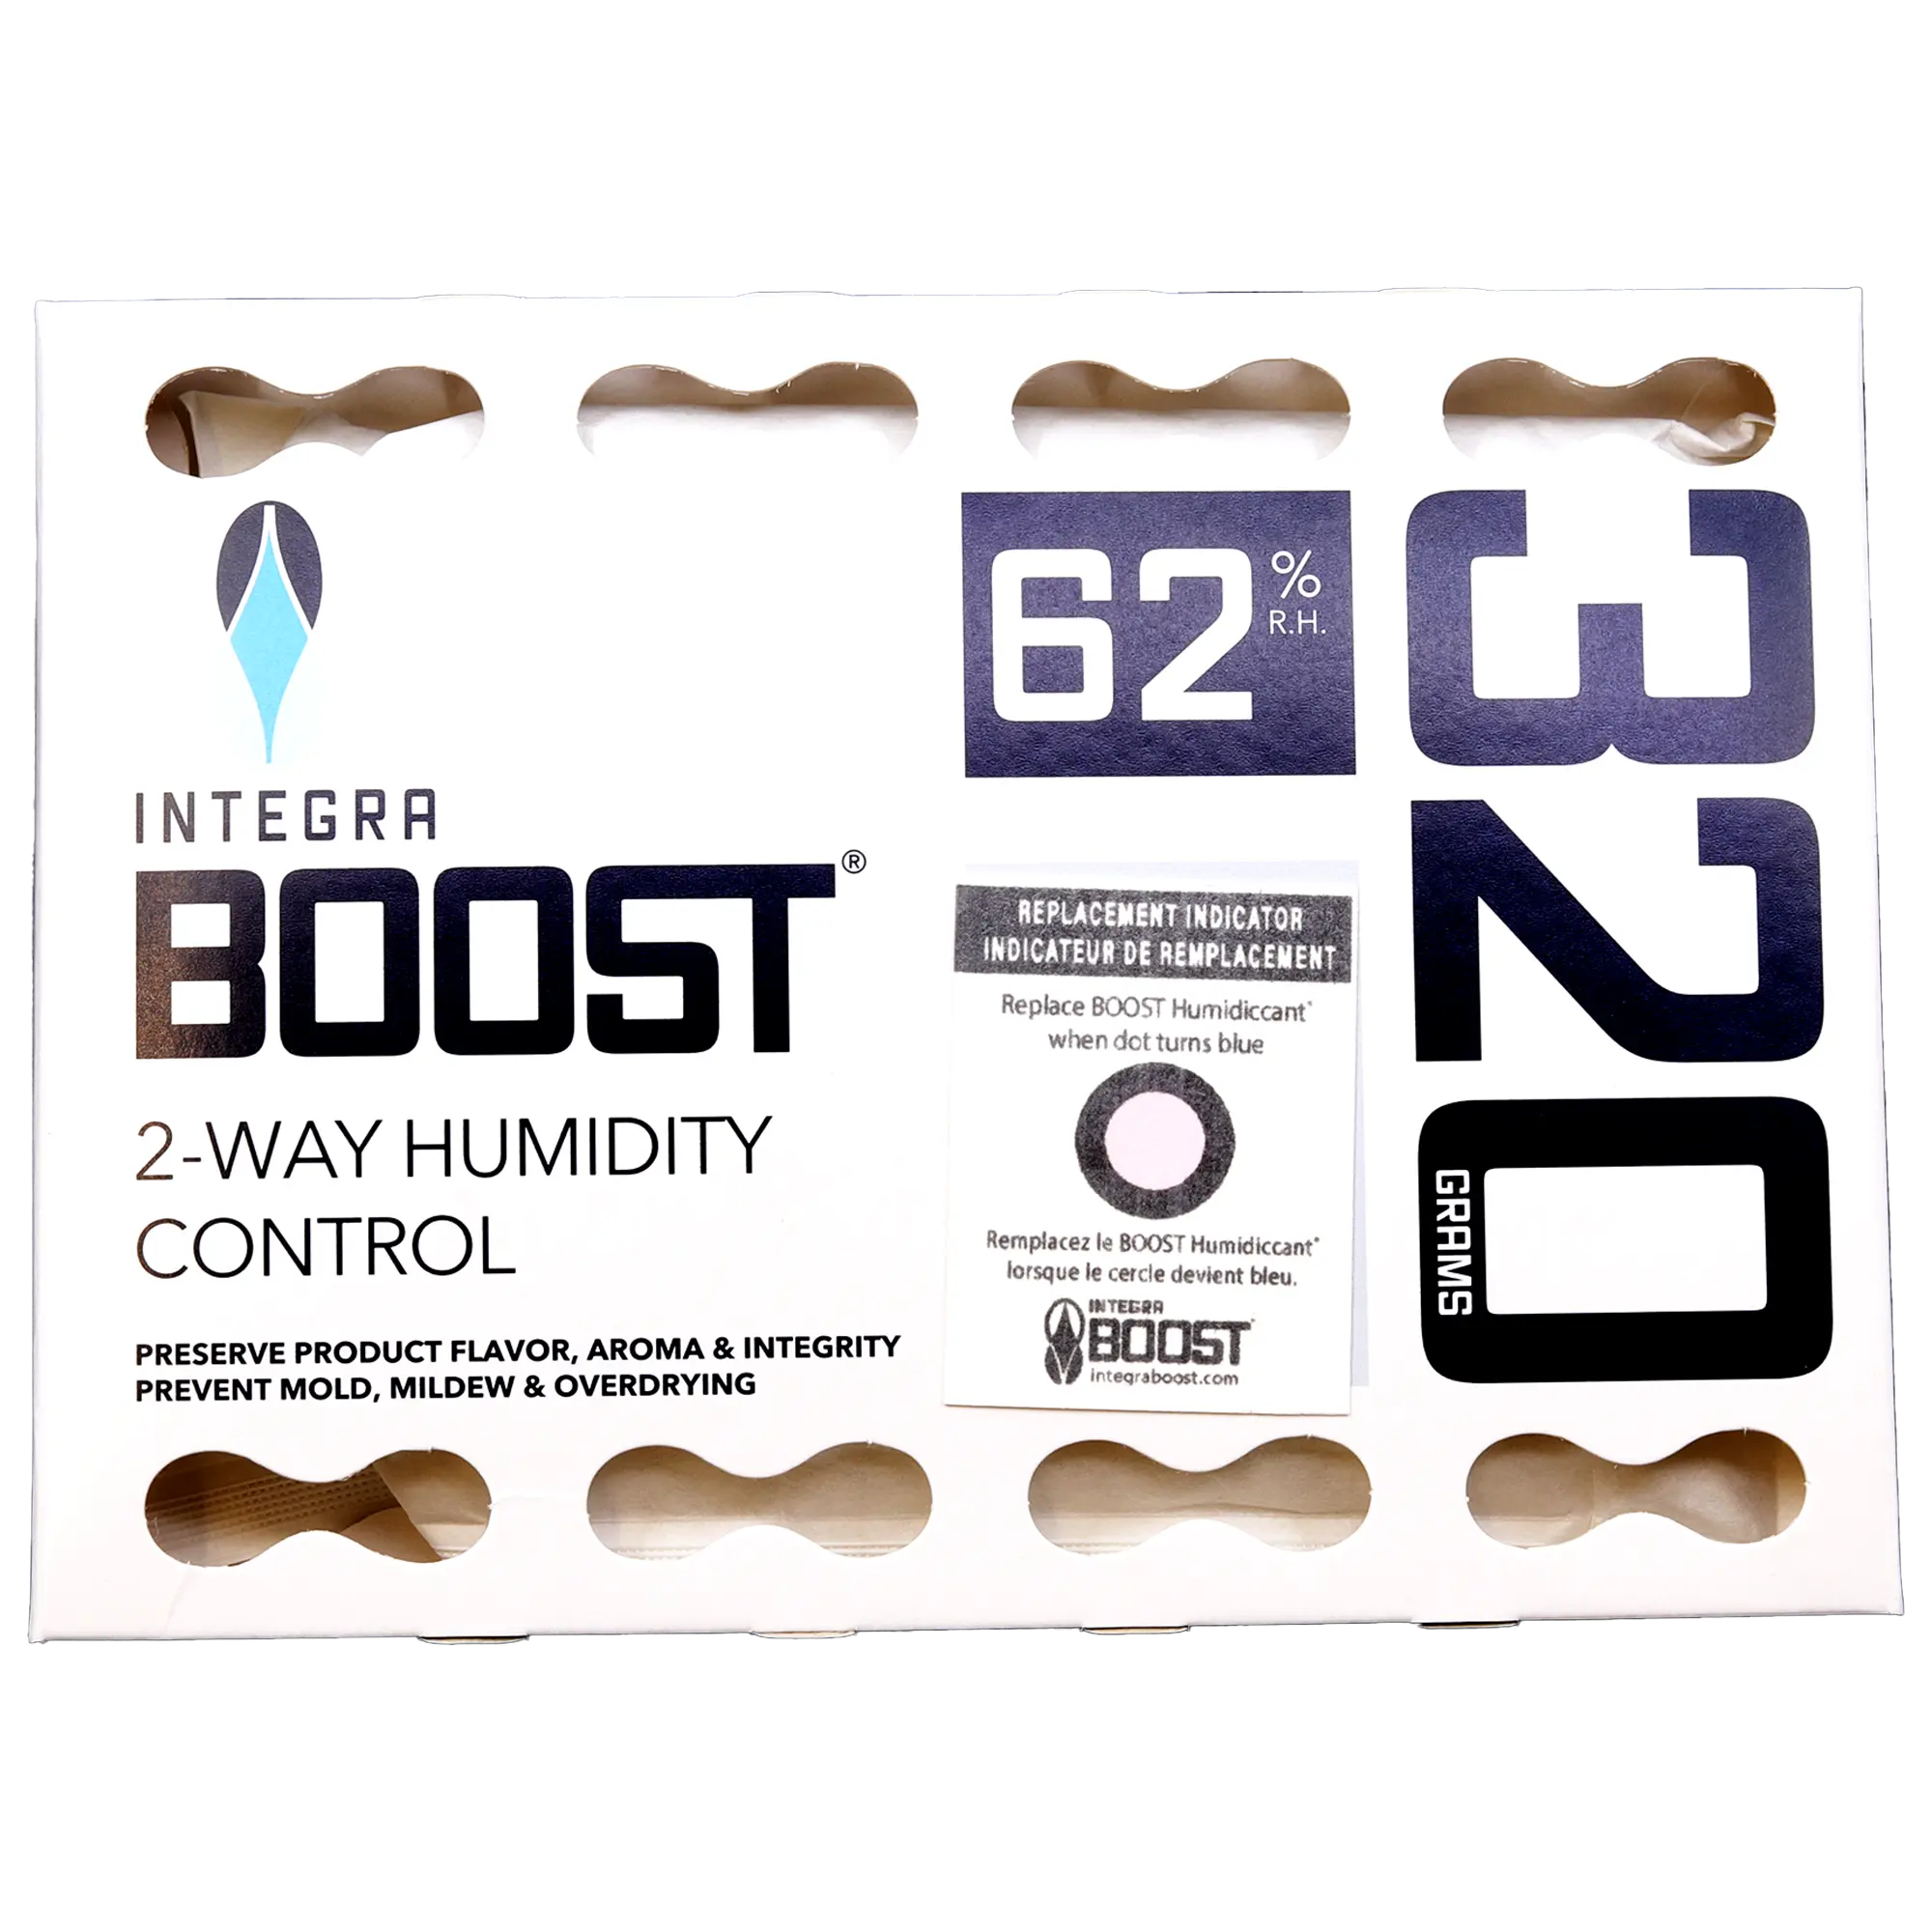 Integra Boost 320g Befeuchterpack 62% R.H.
